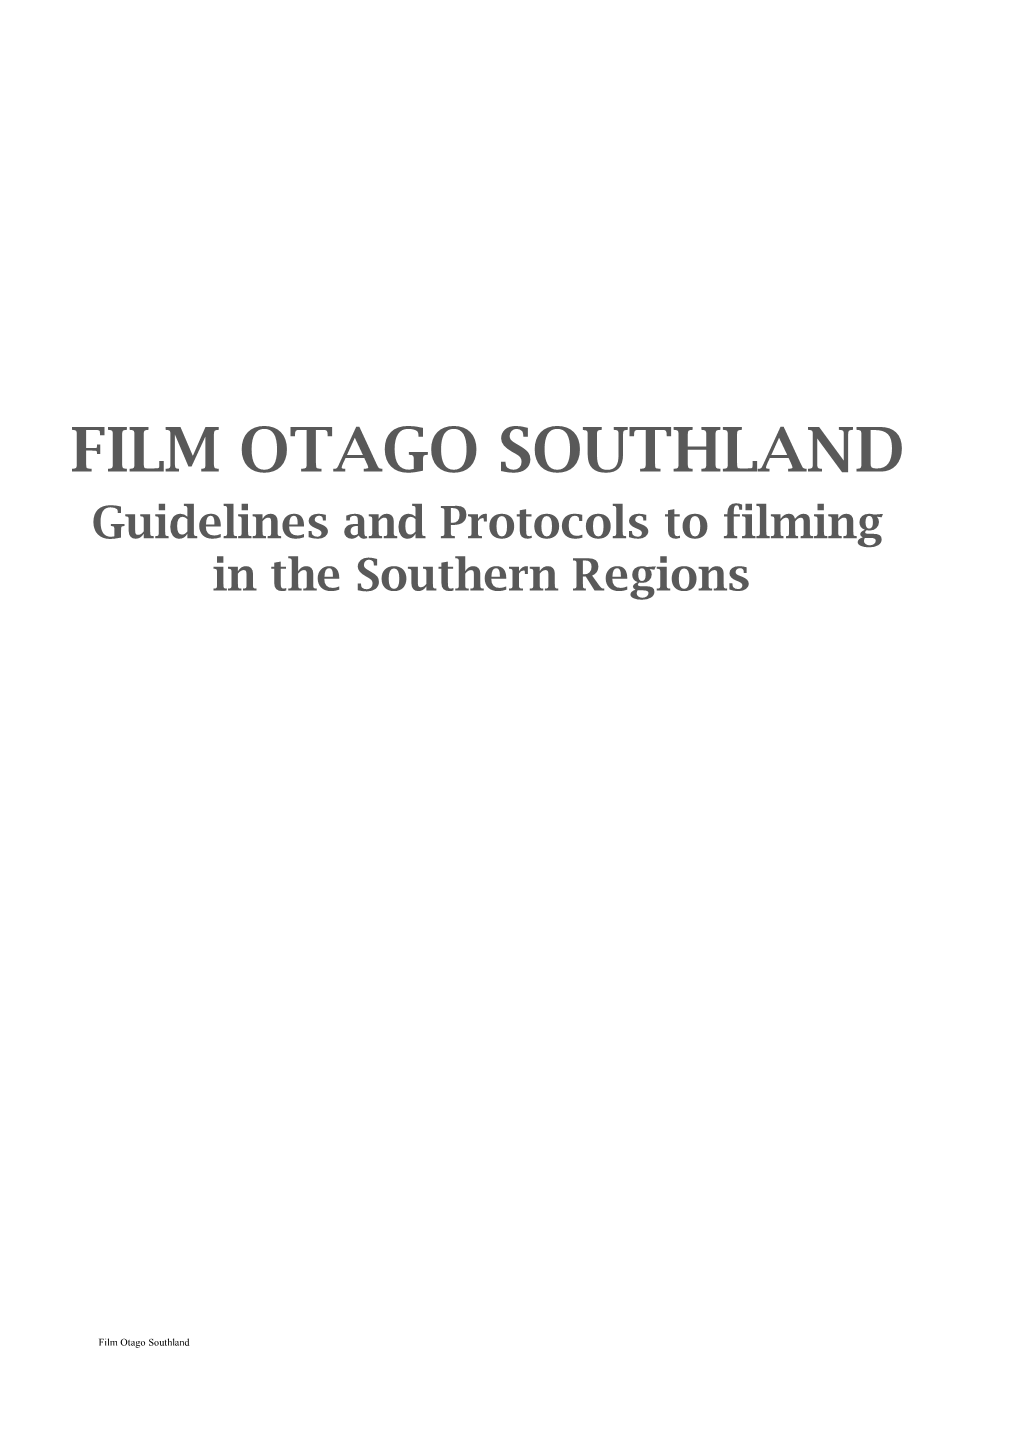 Guidelines and Protocols to Filming in the Southern Regions